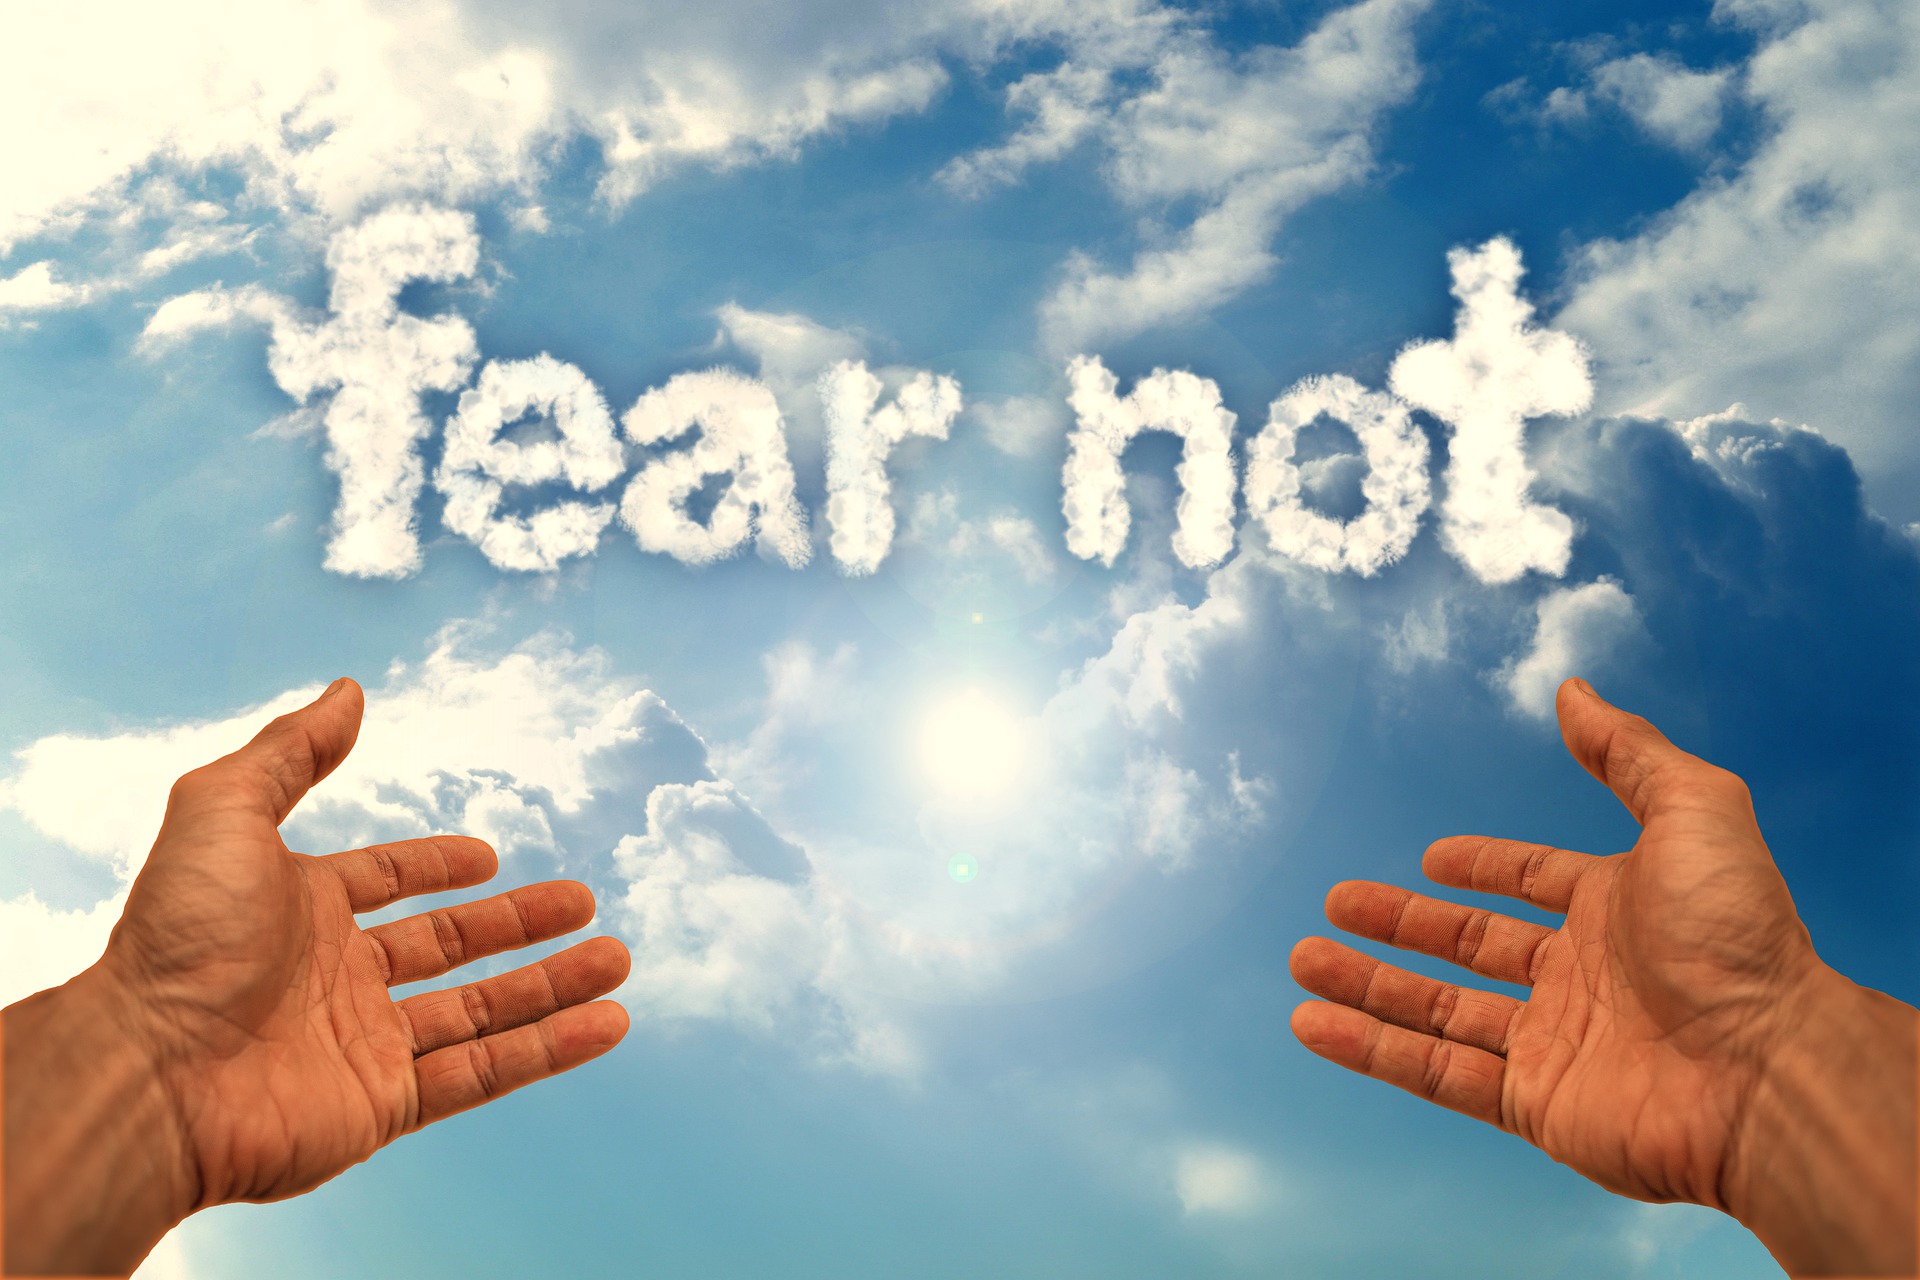 God's Word says fear not